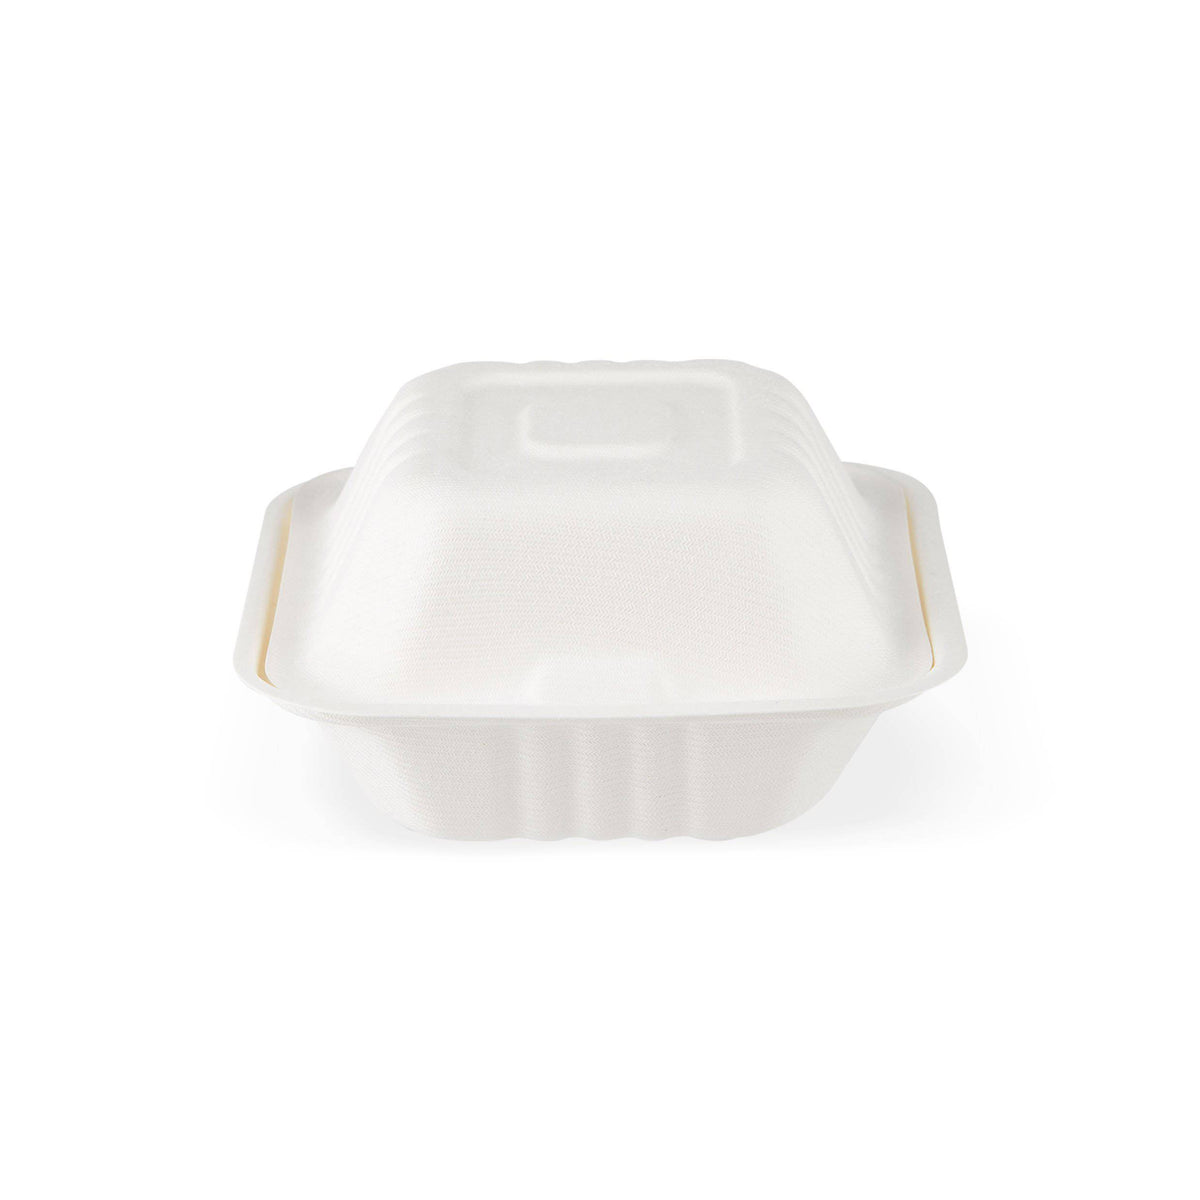 BIO DEGRADABLE BURGER BOX 6 INCH 500 Pieces - Hotpack Global